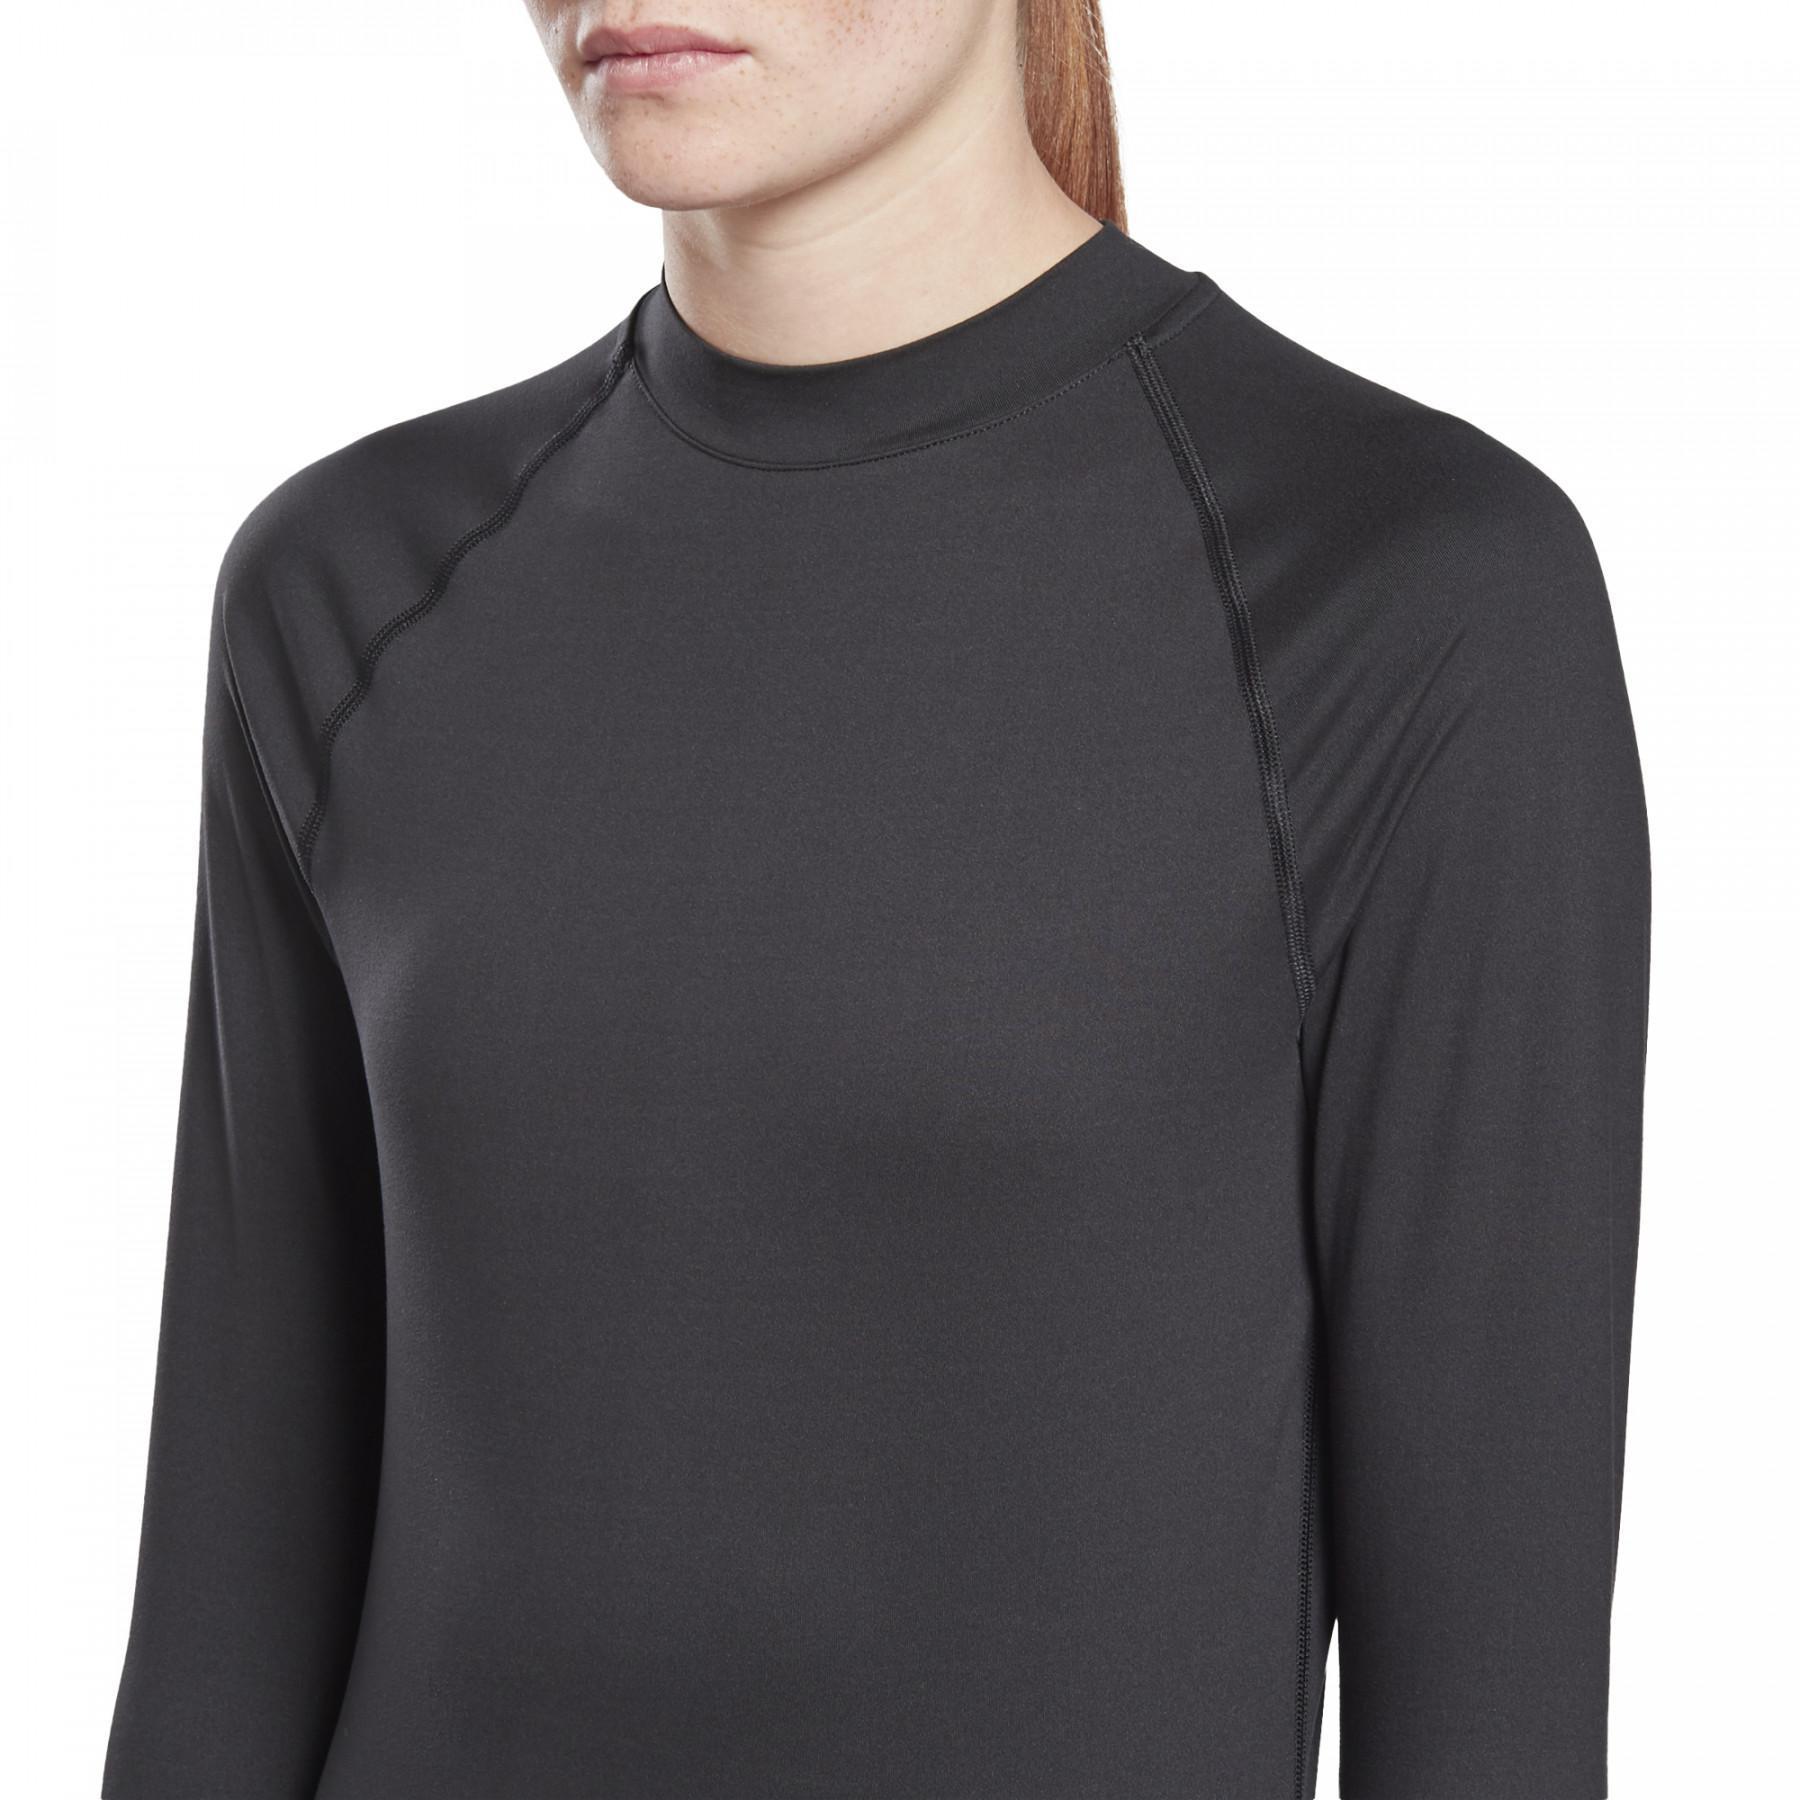 Frauen-T-Shirt Reebok Thermowarm Touch Graphic Base Layer